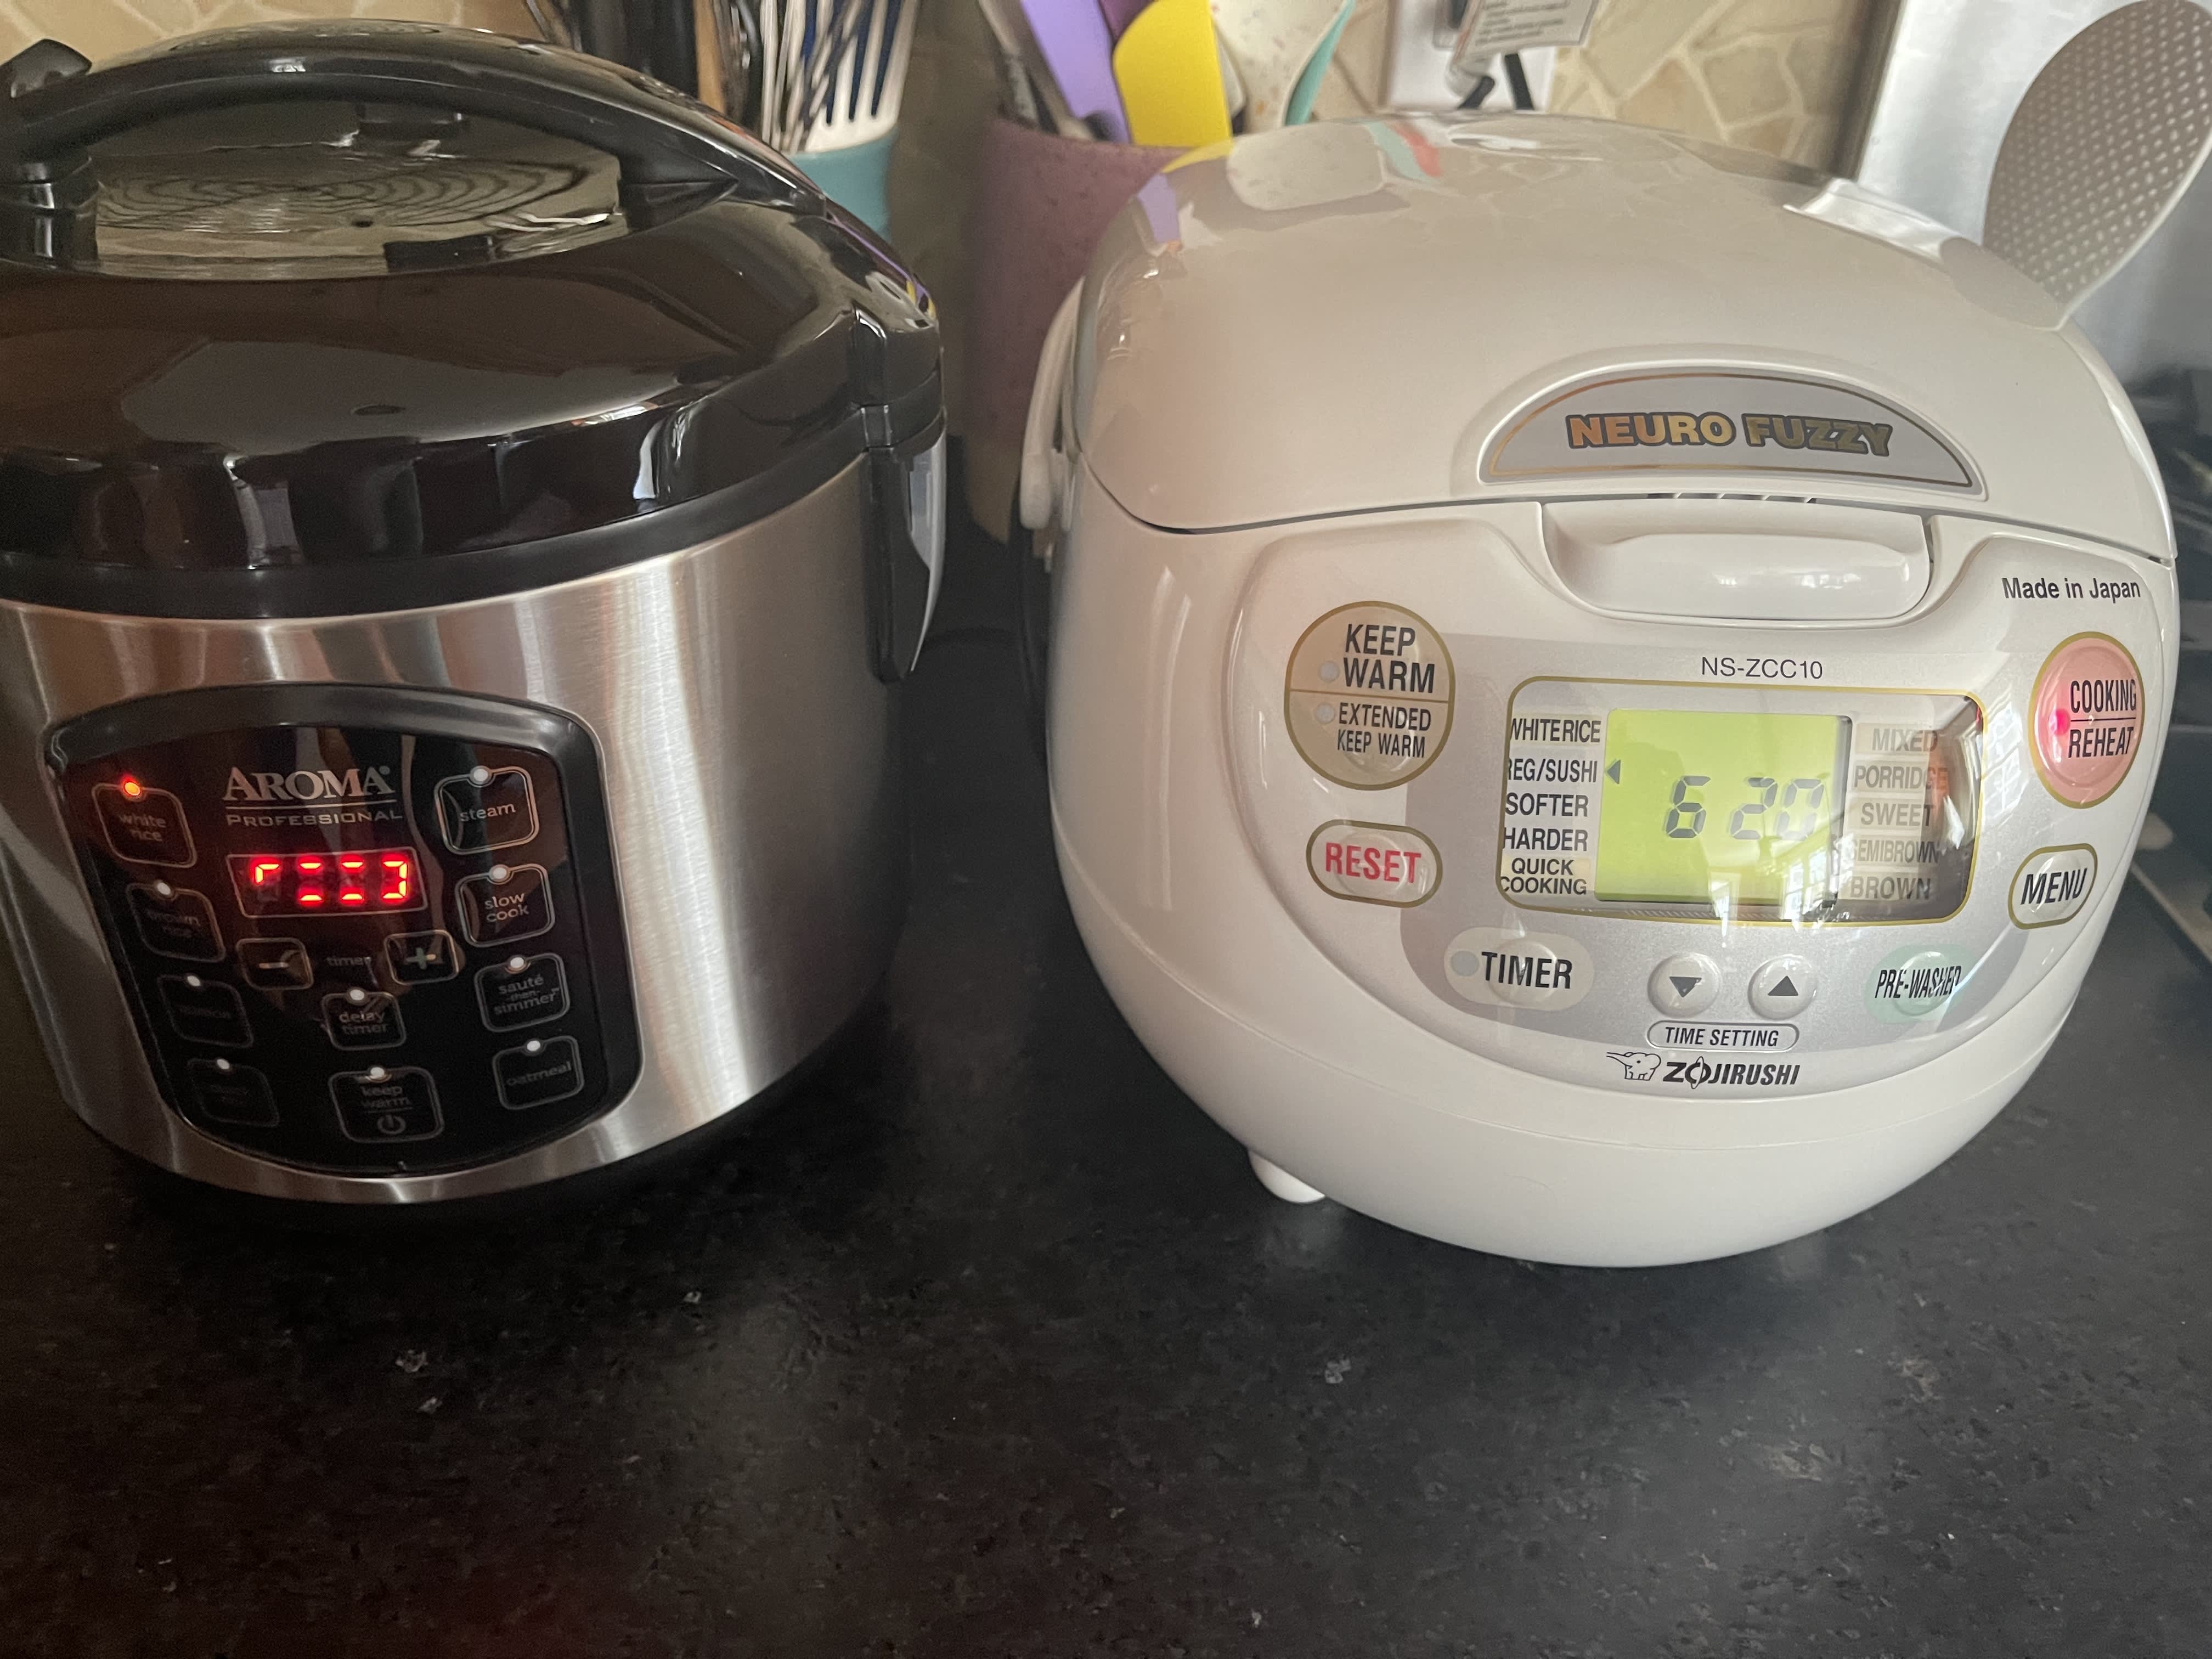 The Best Rice Cooker - Techlicious